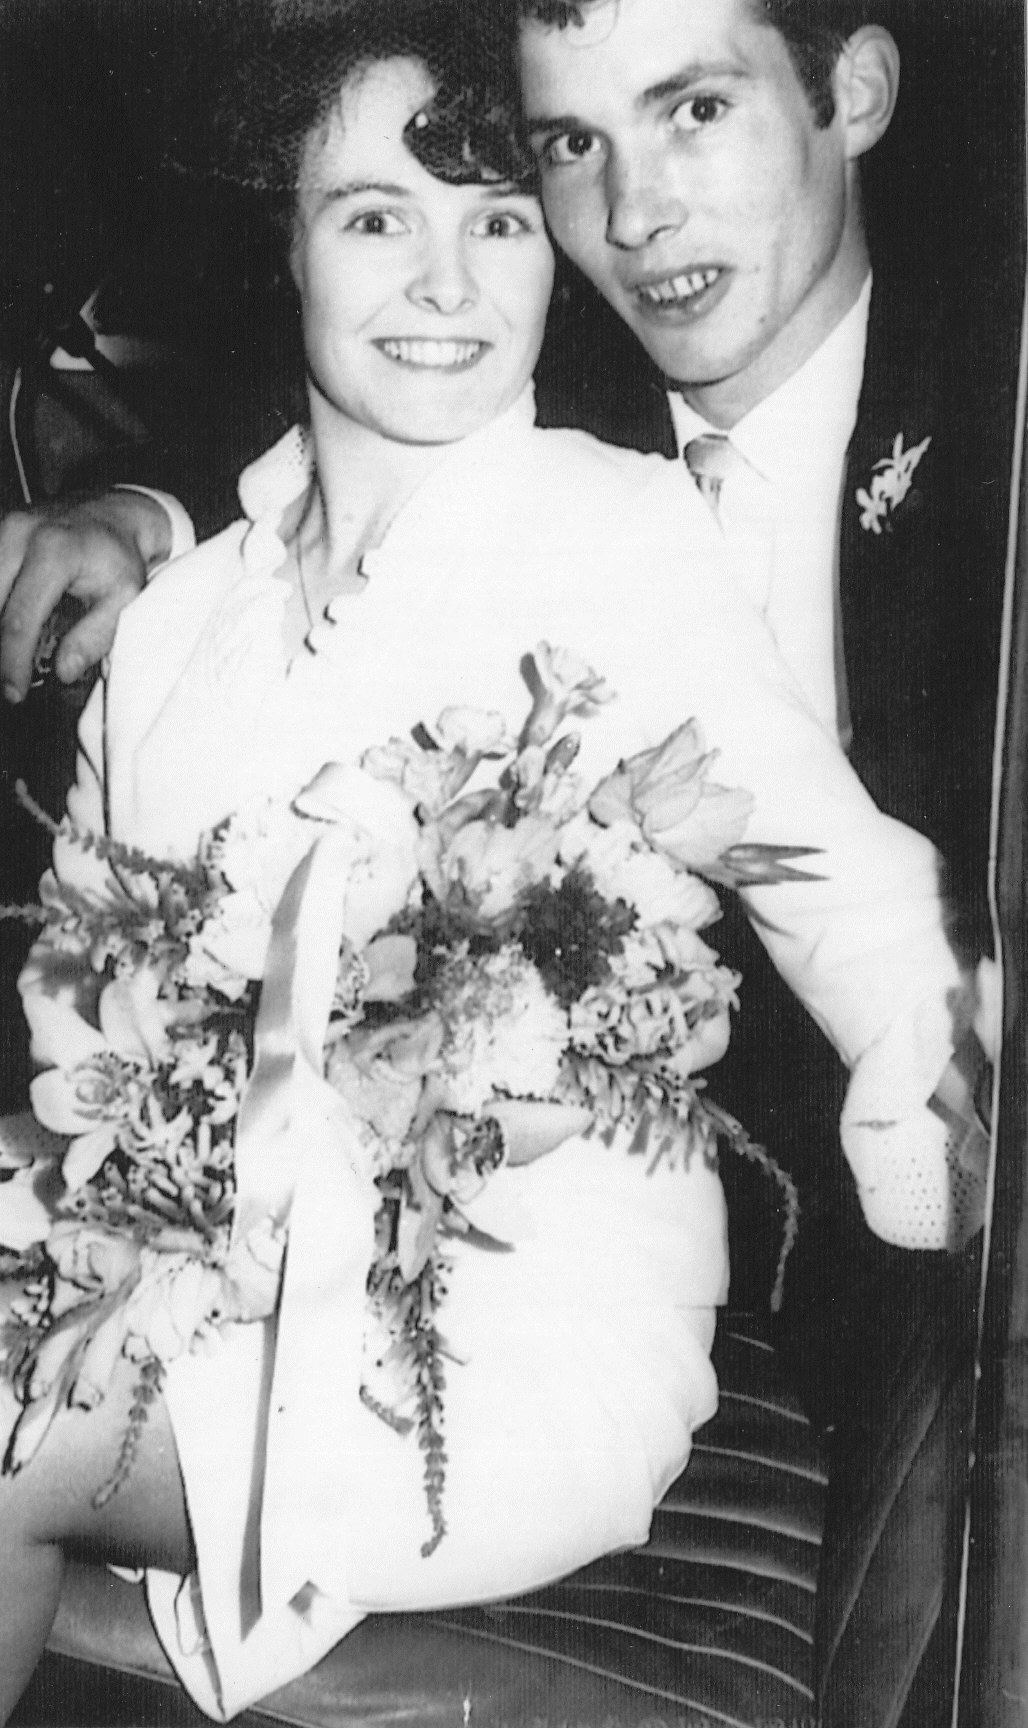 Mum and dad on their wedding day 1965